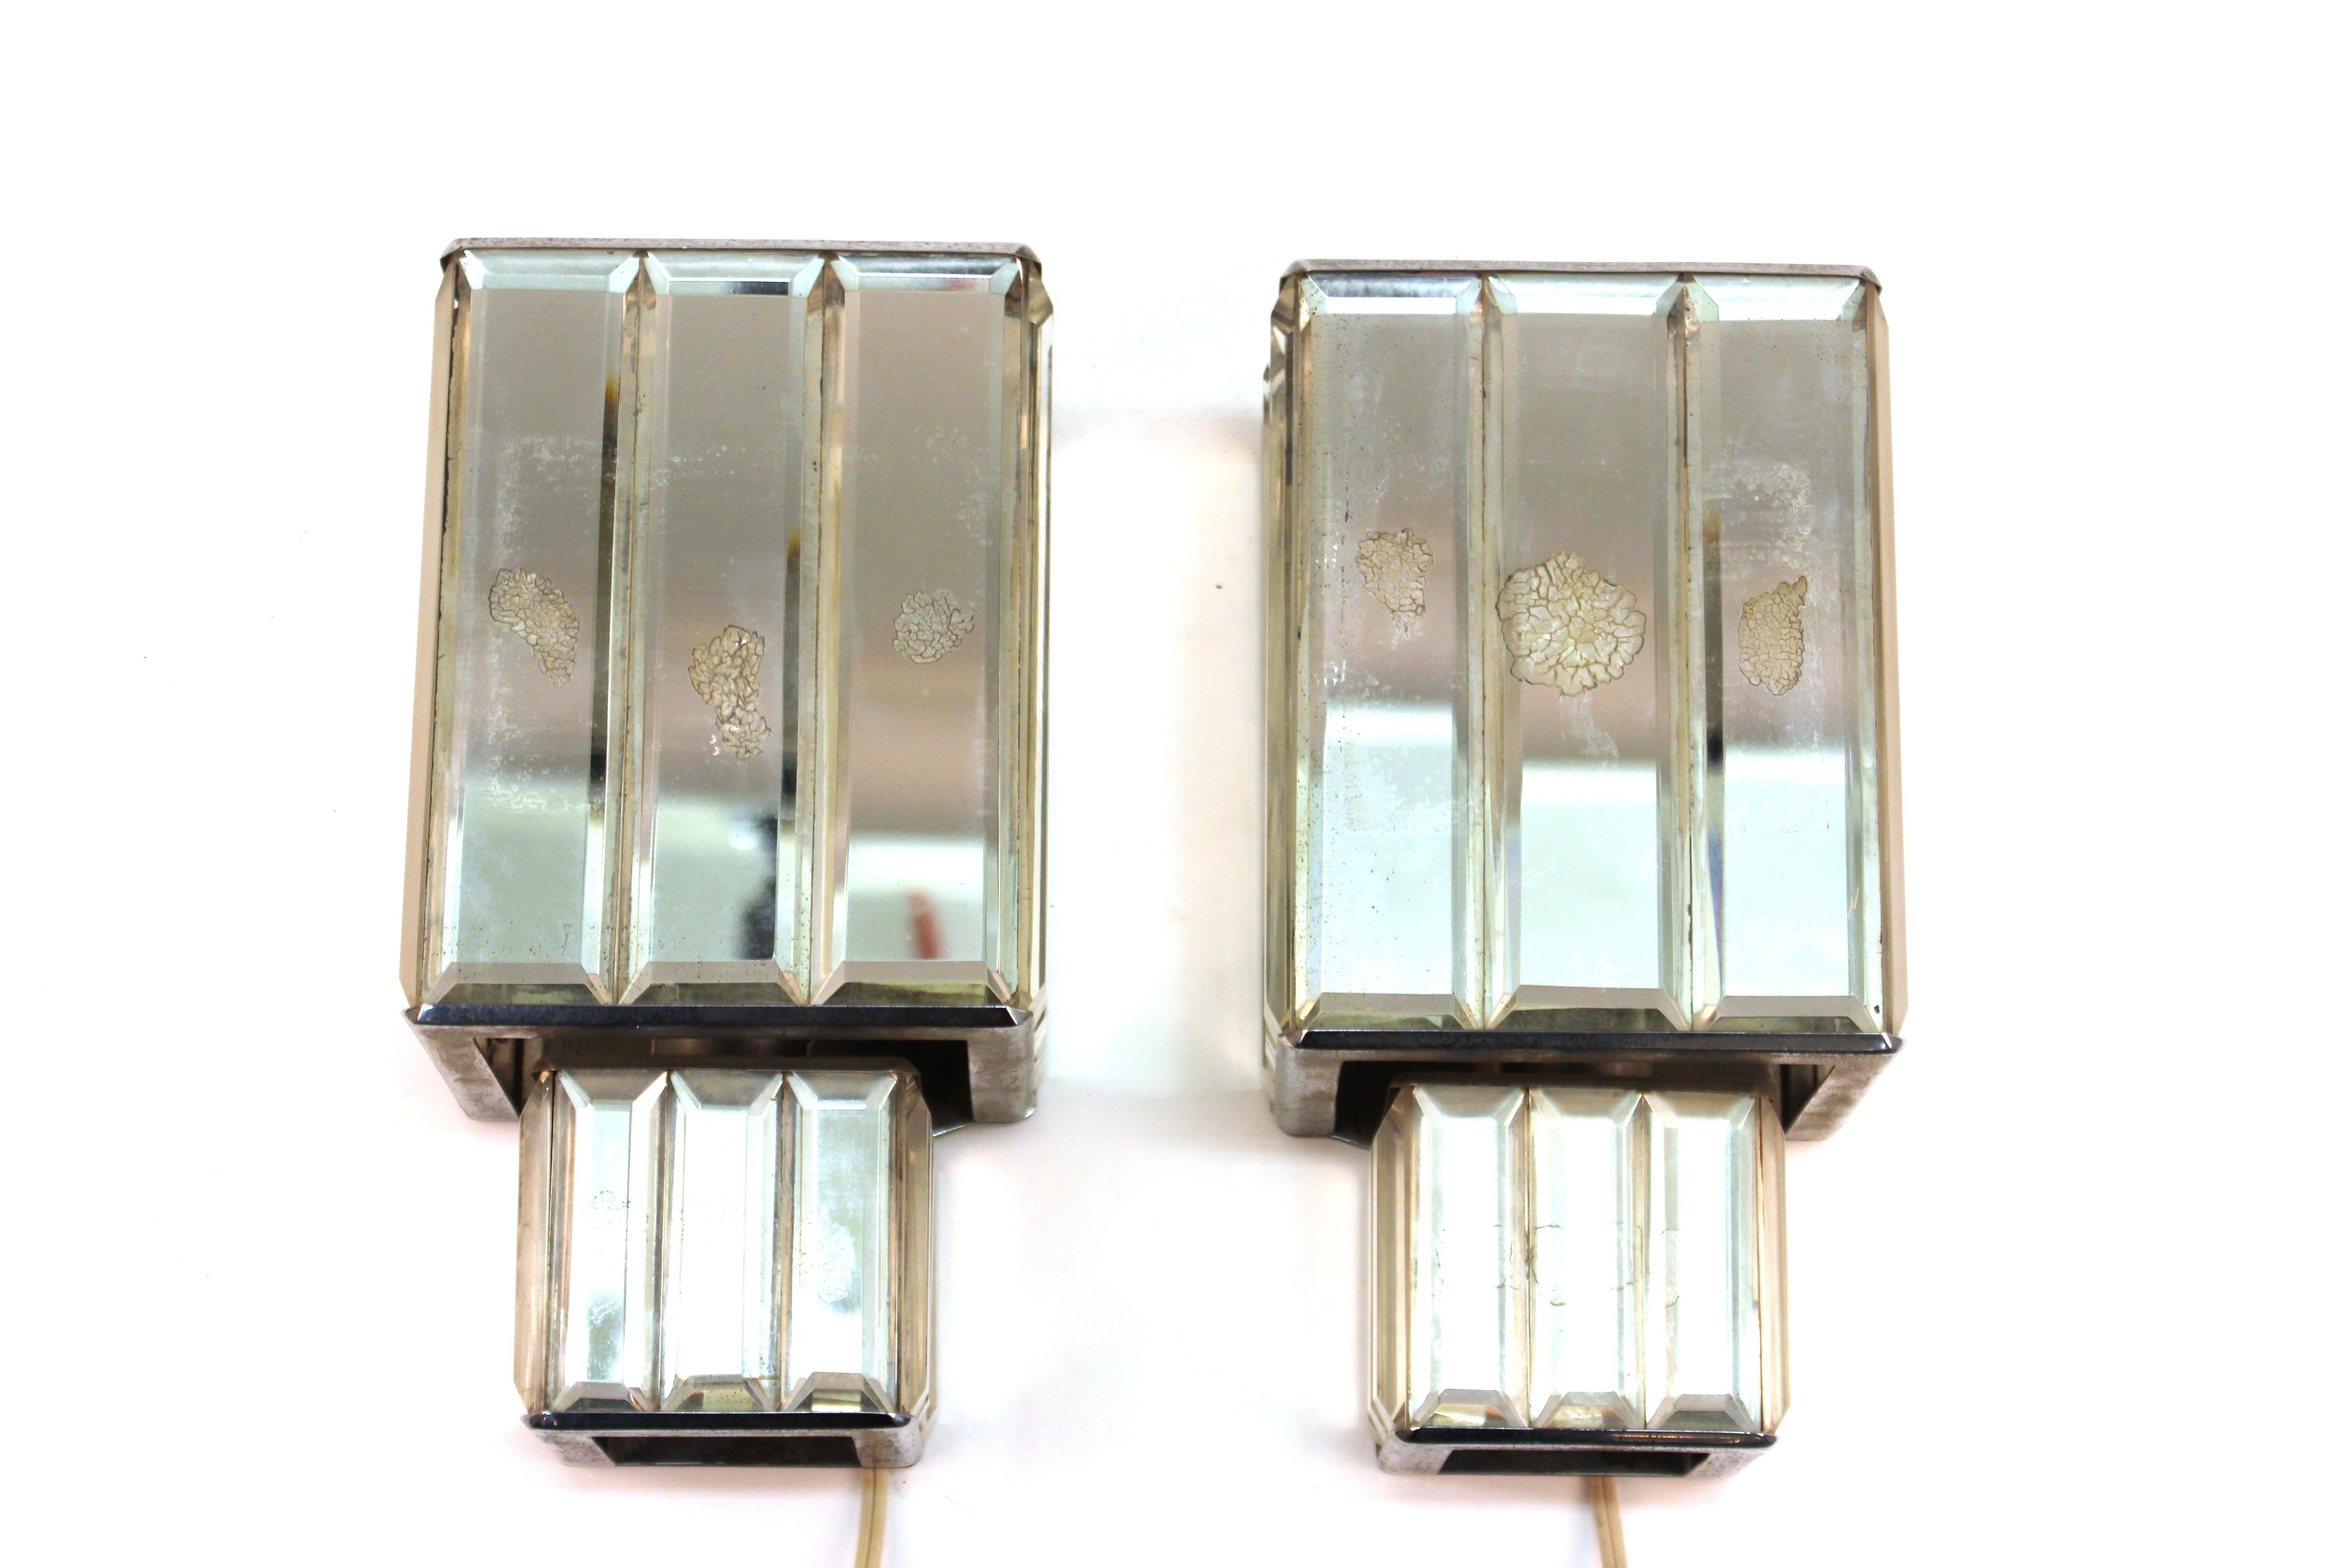 Art Deco period pair of wall sconces with metal structure and applied beveled mirrors and glass elements. The pair was likely made in Europe during the 1930s and is in great vintage condition with age-appropriate wear.